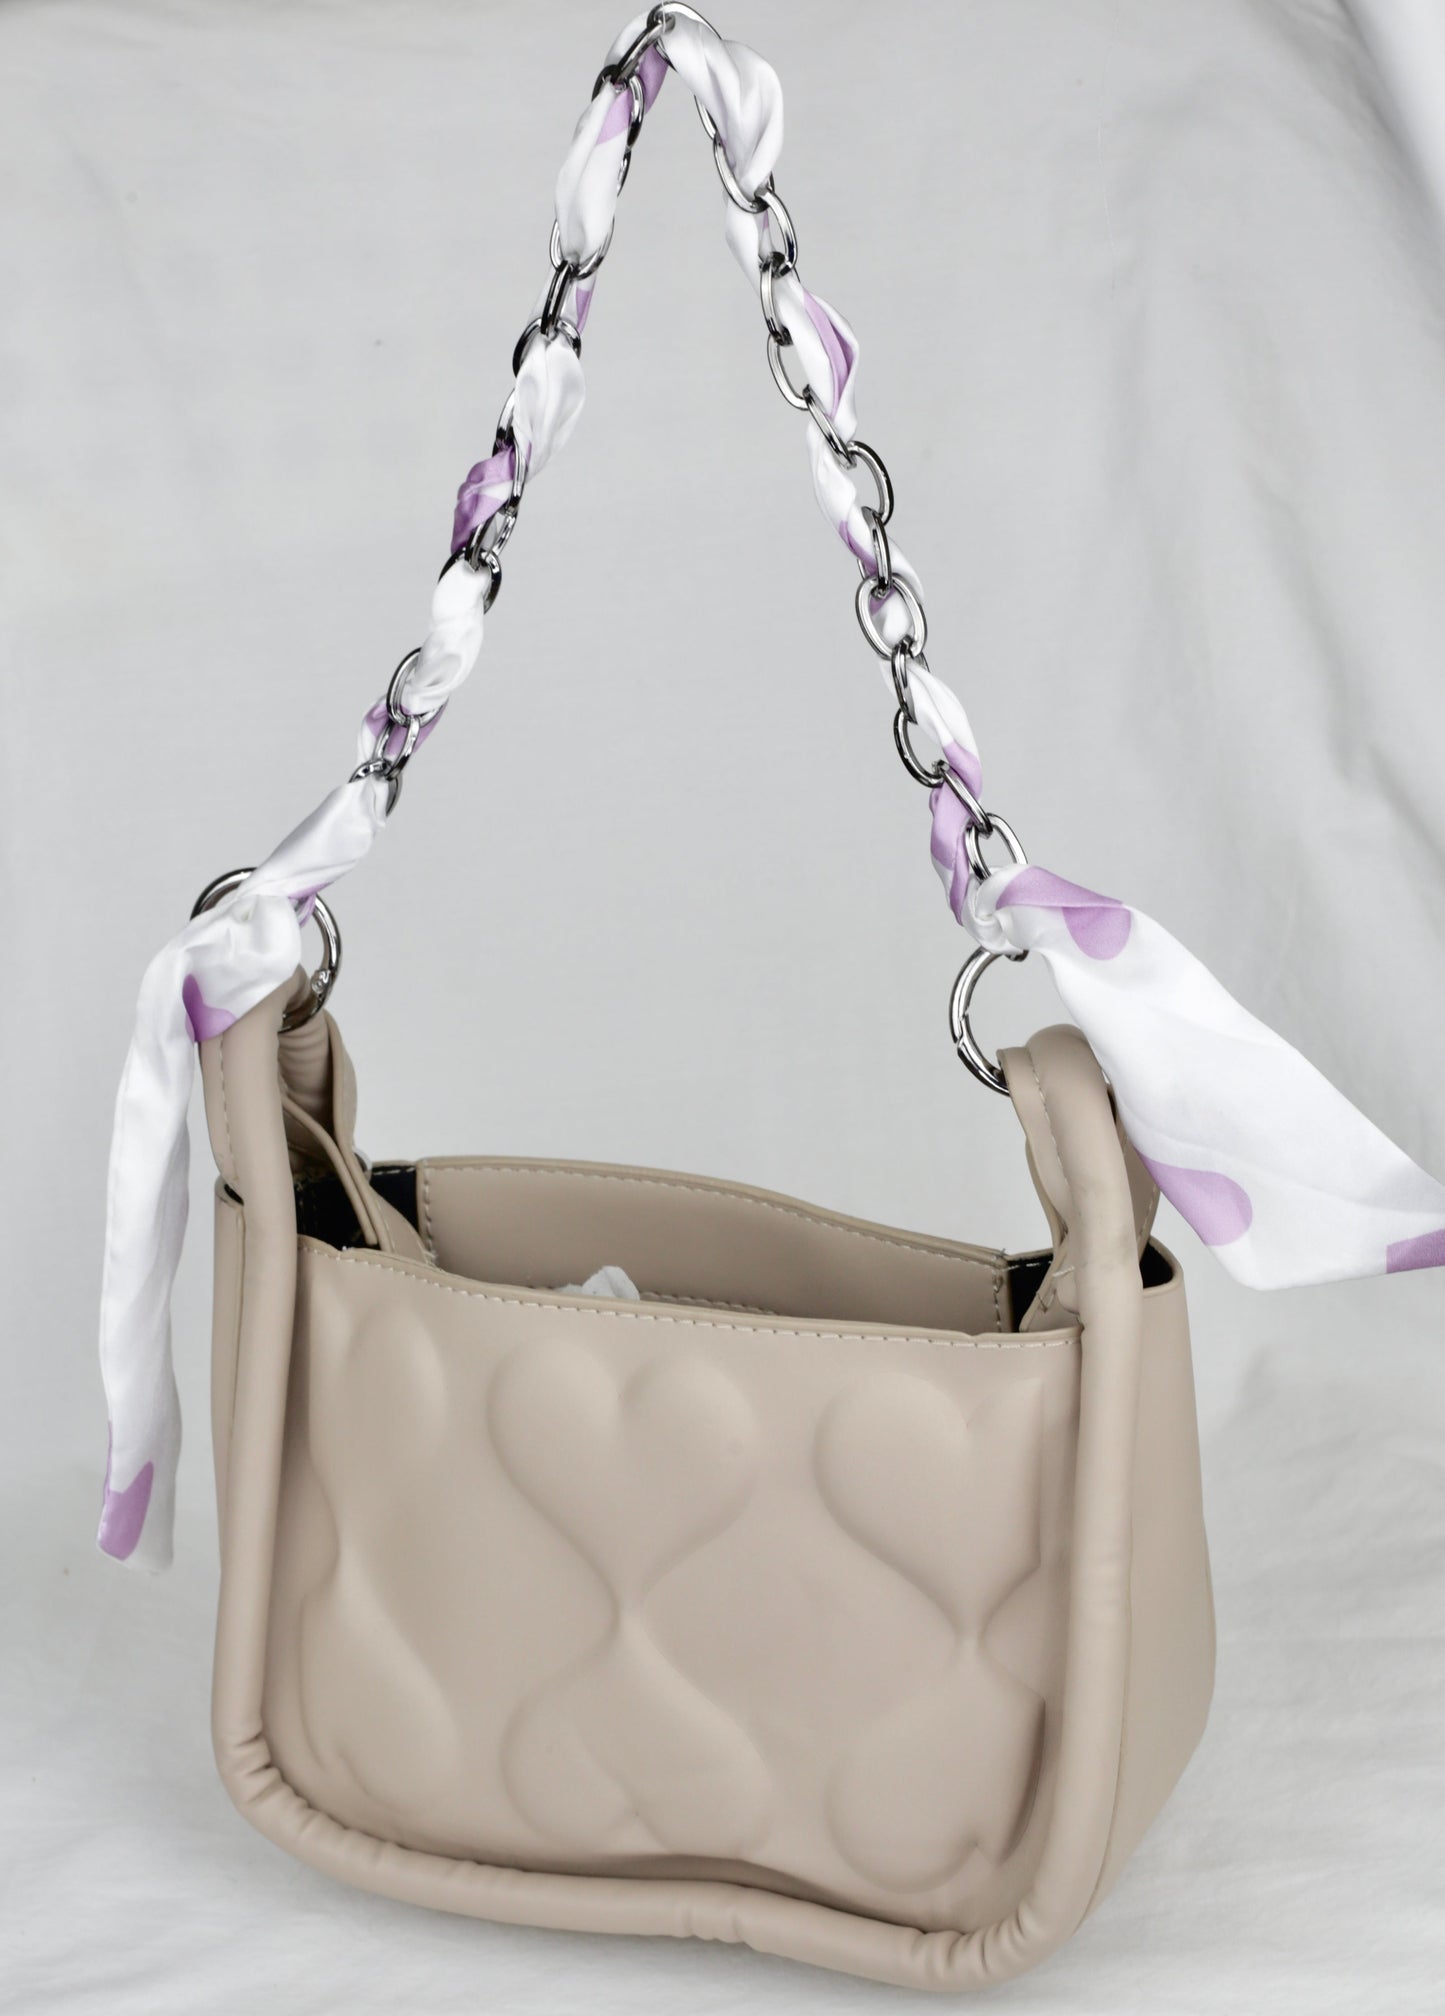 Chloe Hand Bag - The Accessorys Official